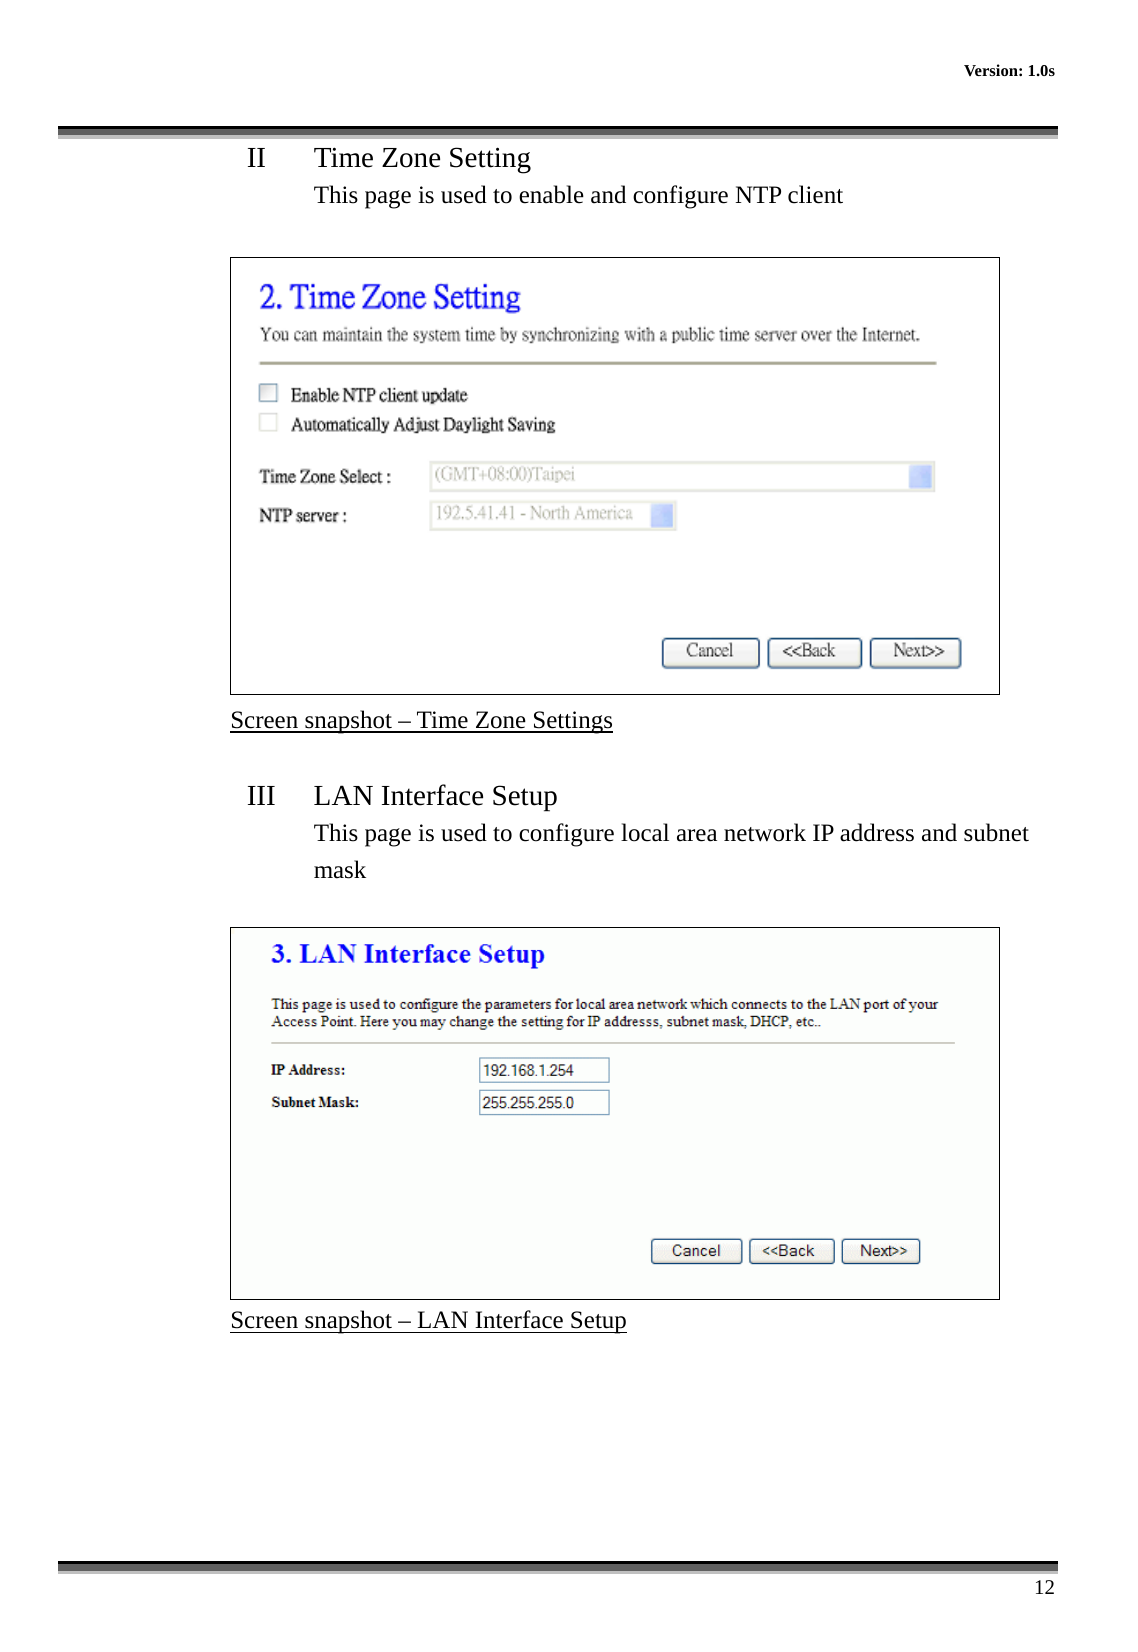      Version: 1.0s      12 II  Time Zone Setting This page is used to enable and configure NTP client   Screen snapshot – Time Zone Settings  III  LAN Interface Setup This page is used to configure local area network IP address and subnet mask   Screen snapshot – LAN Interface Setup      